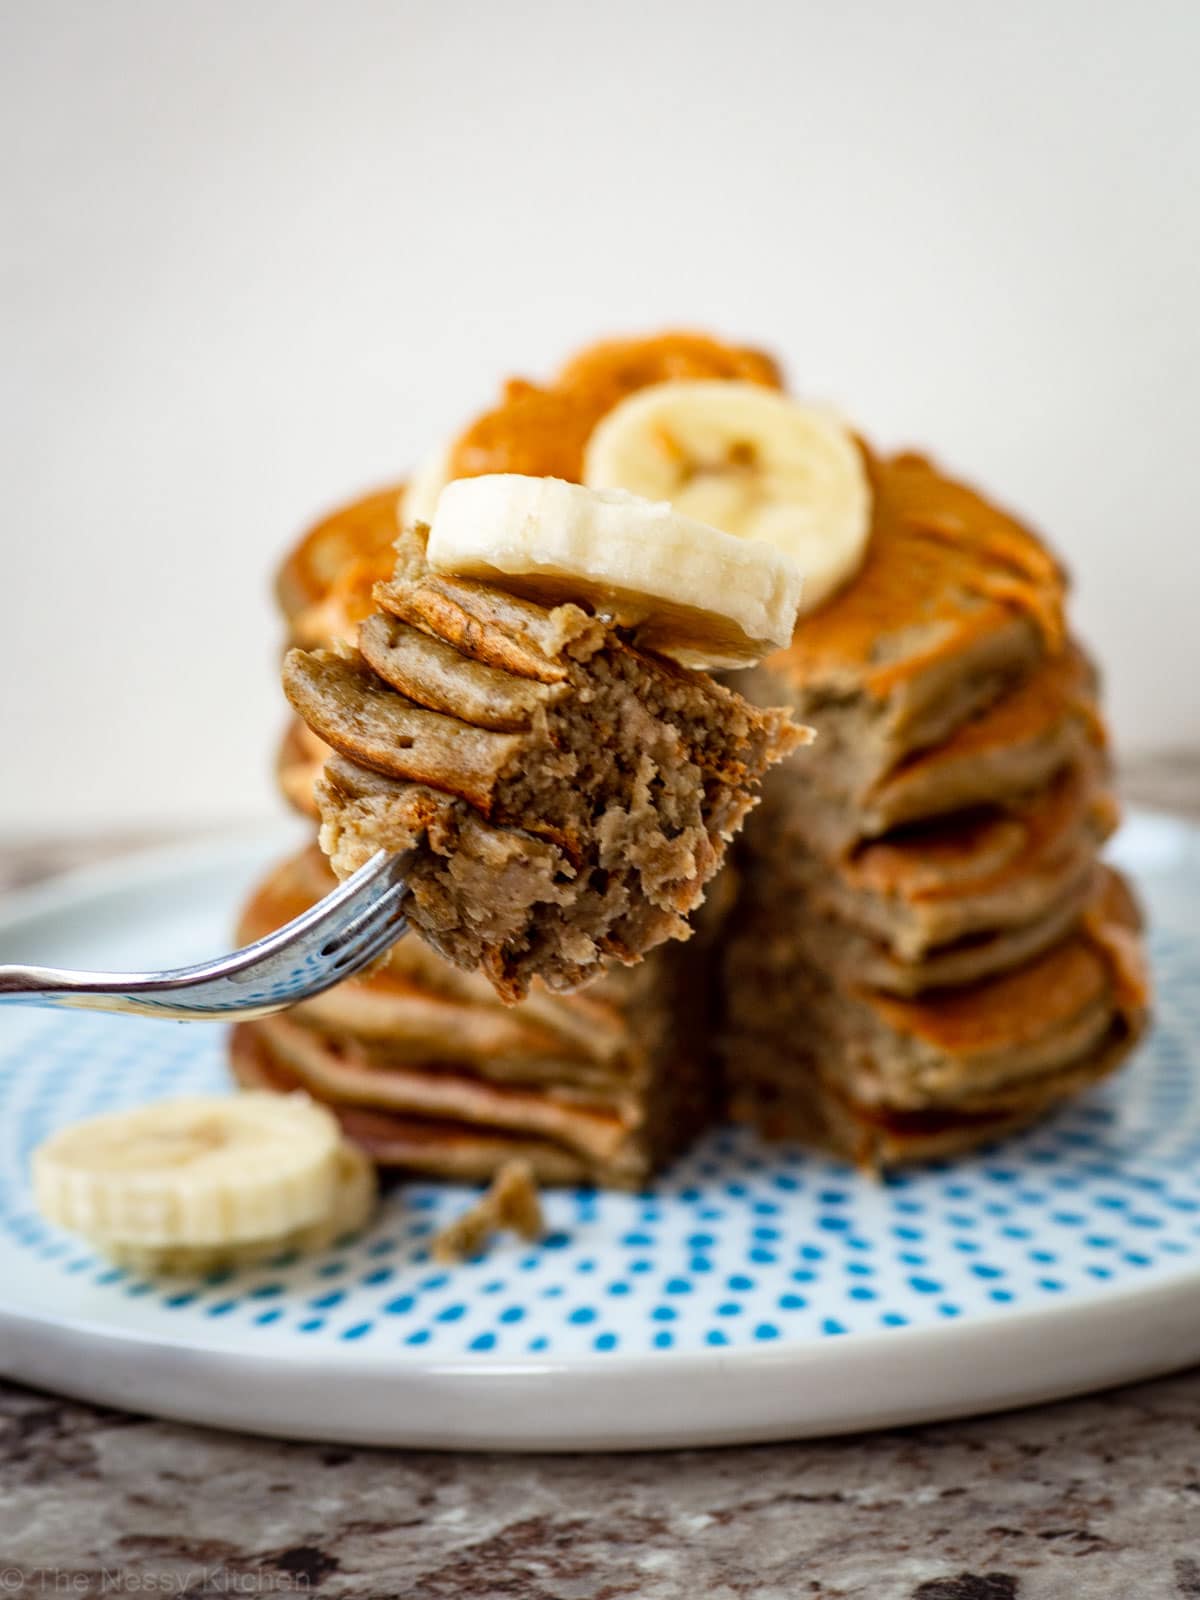 Bite of pancakes on a fork with a slice of banana.